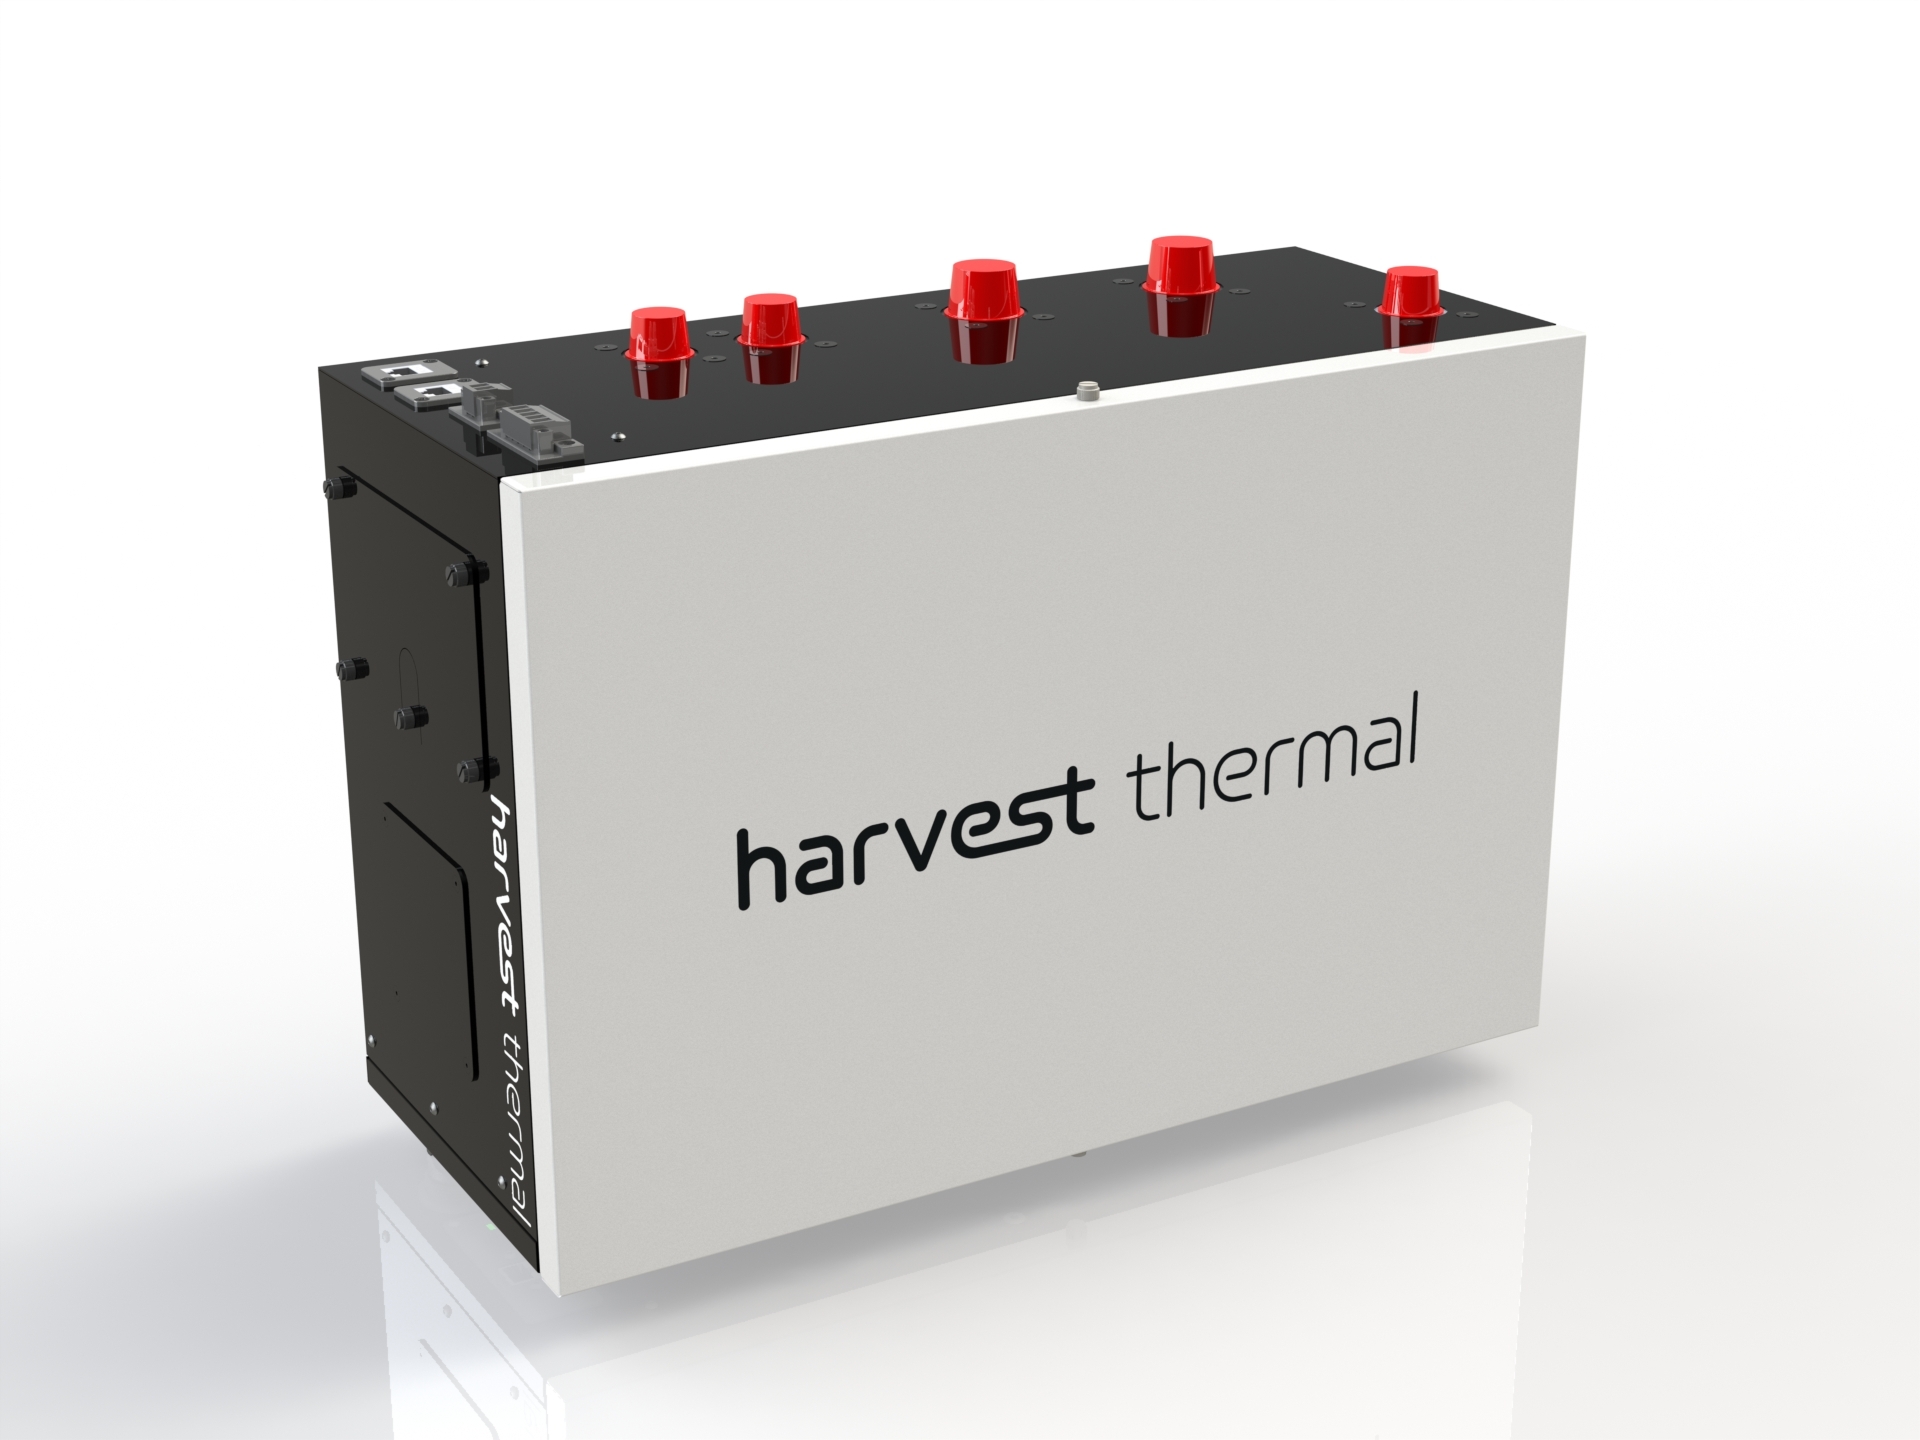 Harvest Thermal: Delivering on the Promise of Decarbonization